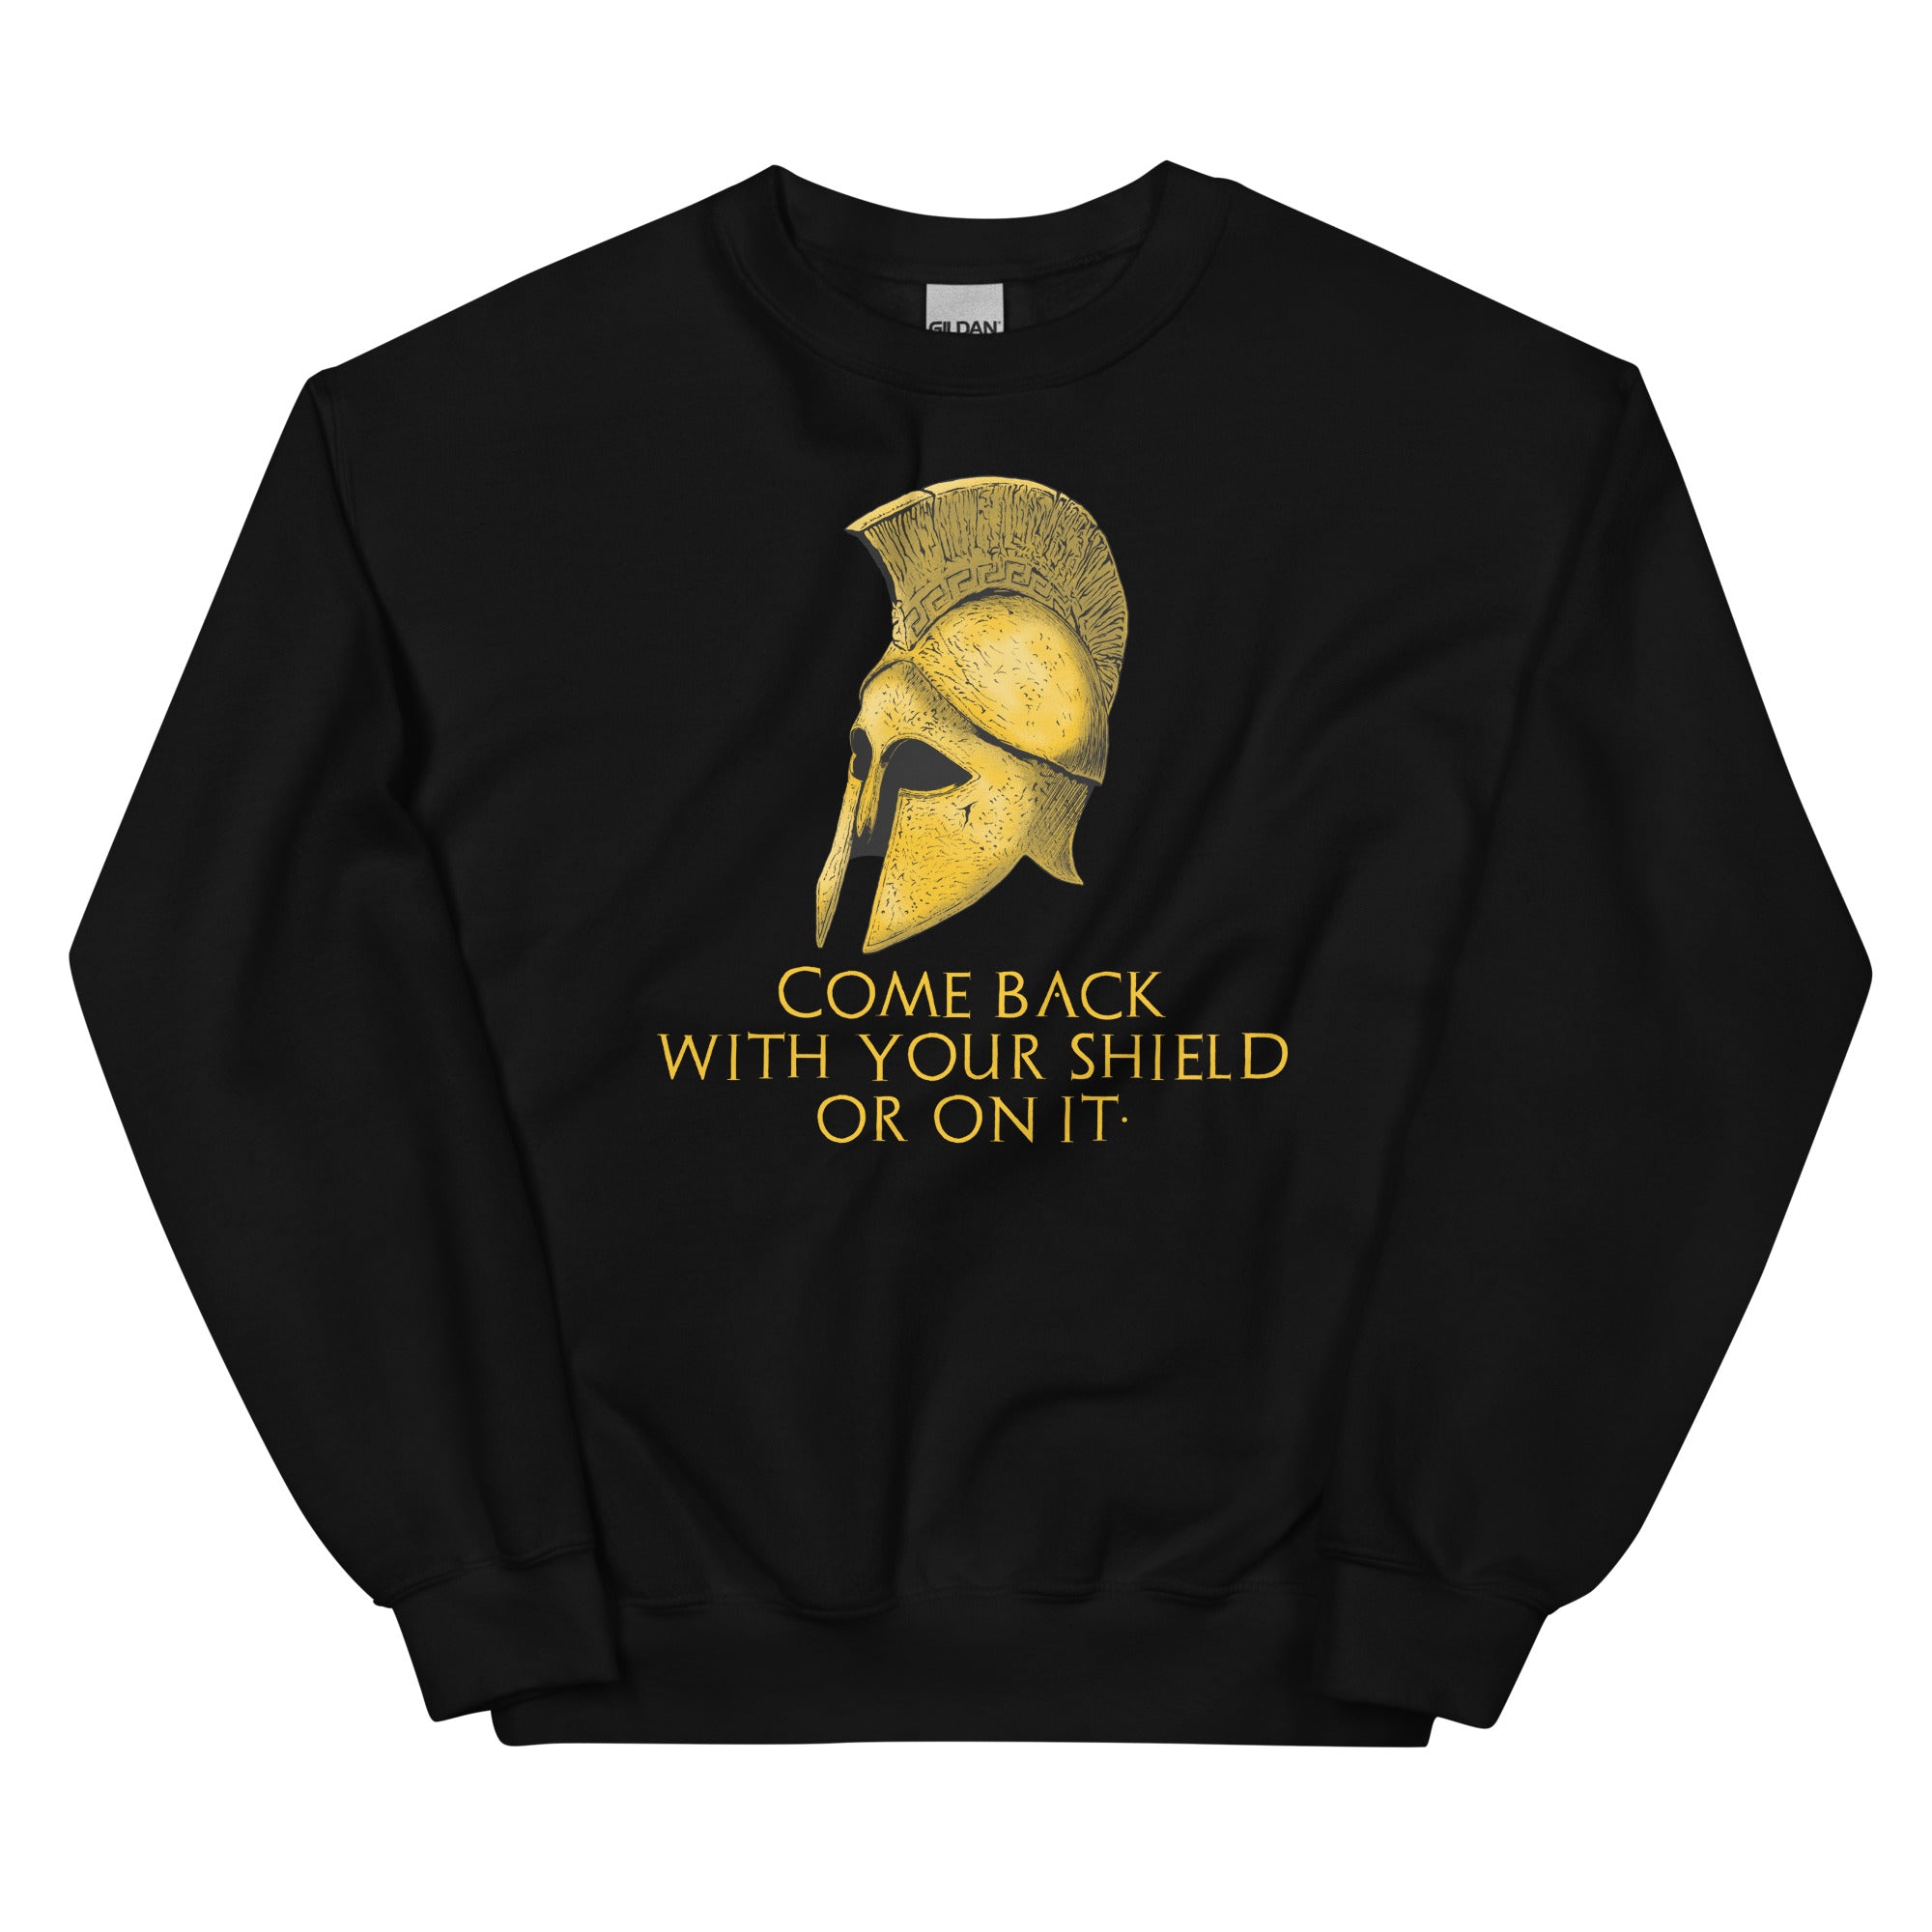 Come back with your shield or on it - Ancient Sparta - Unisex Sweatshirt